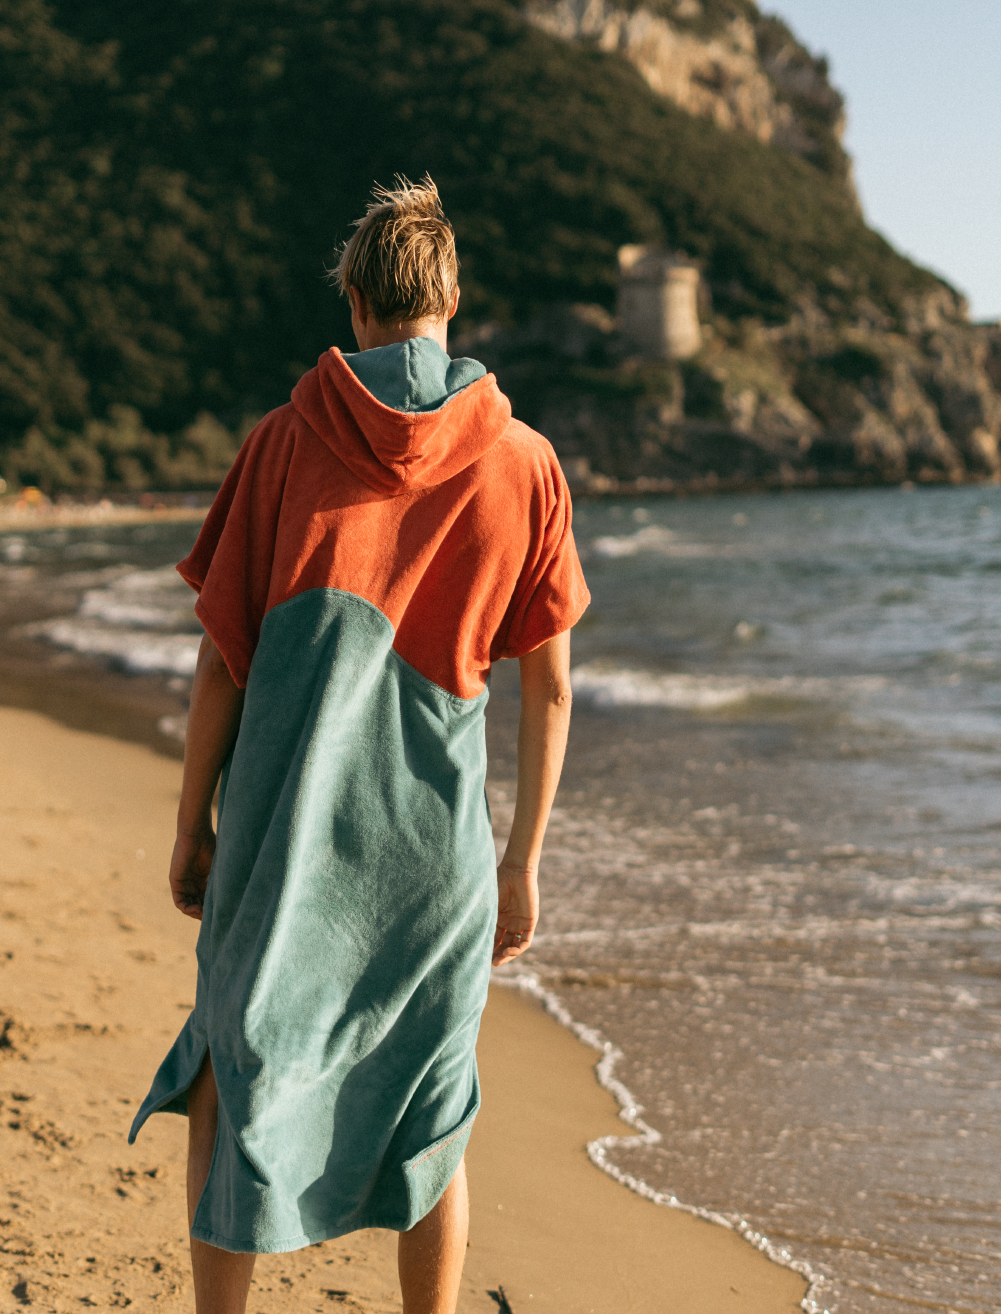 Bamboo Terry Changing Cape - Surf Poncho by Fede Surfbags